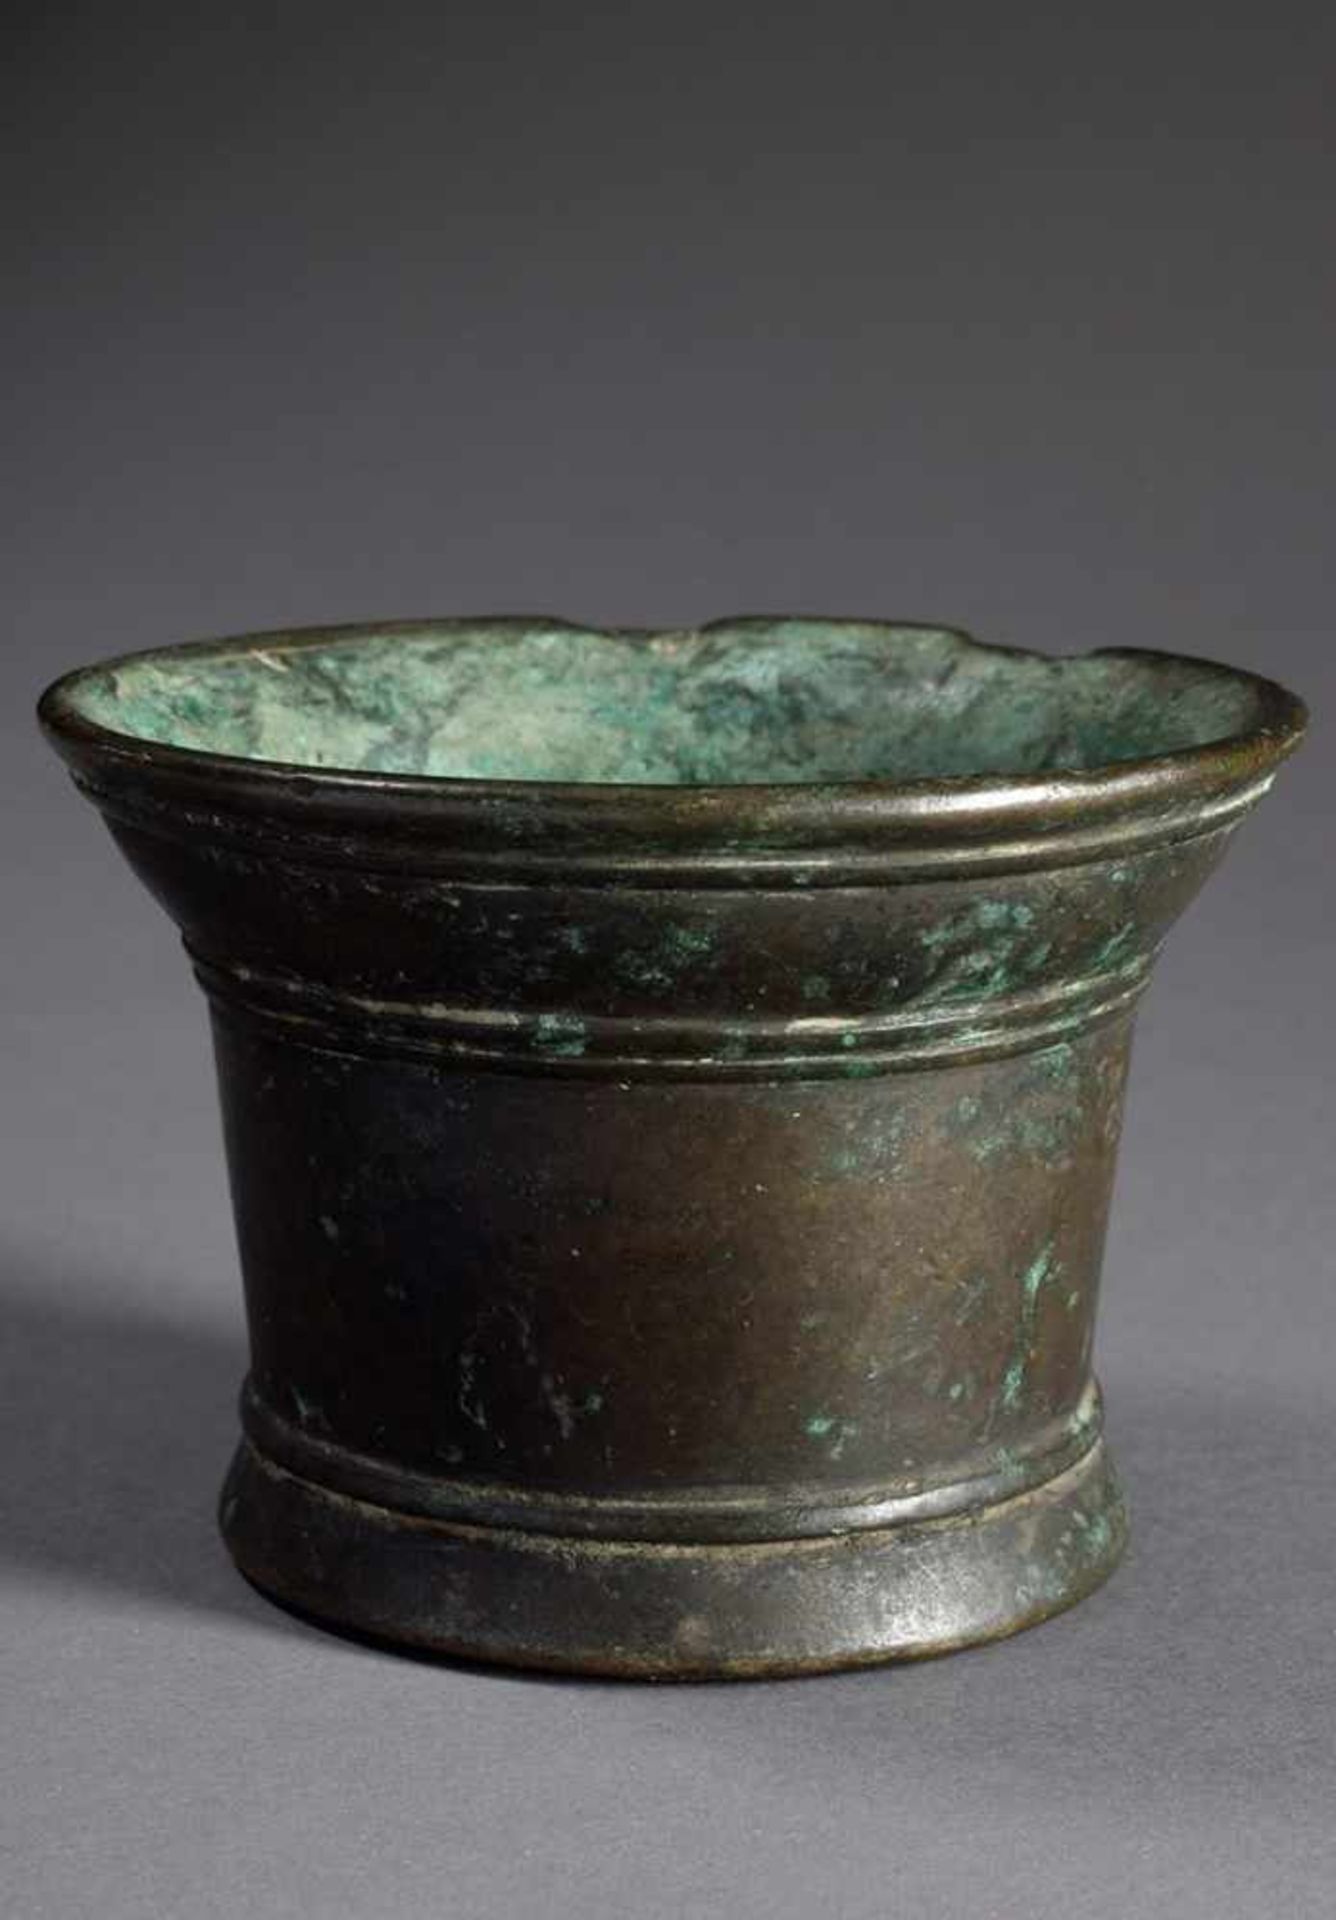 Small bronze mortar with projecting rim and longitudinal grooves, dark patina, probably German